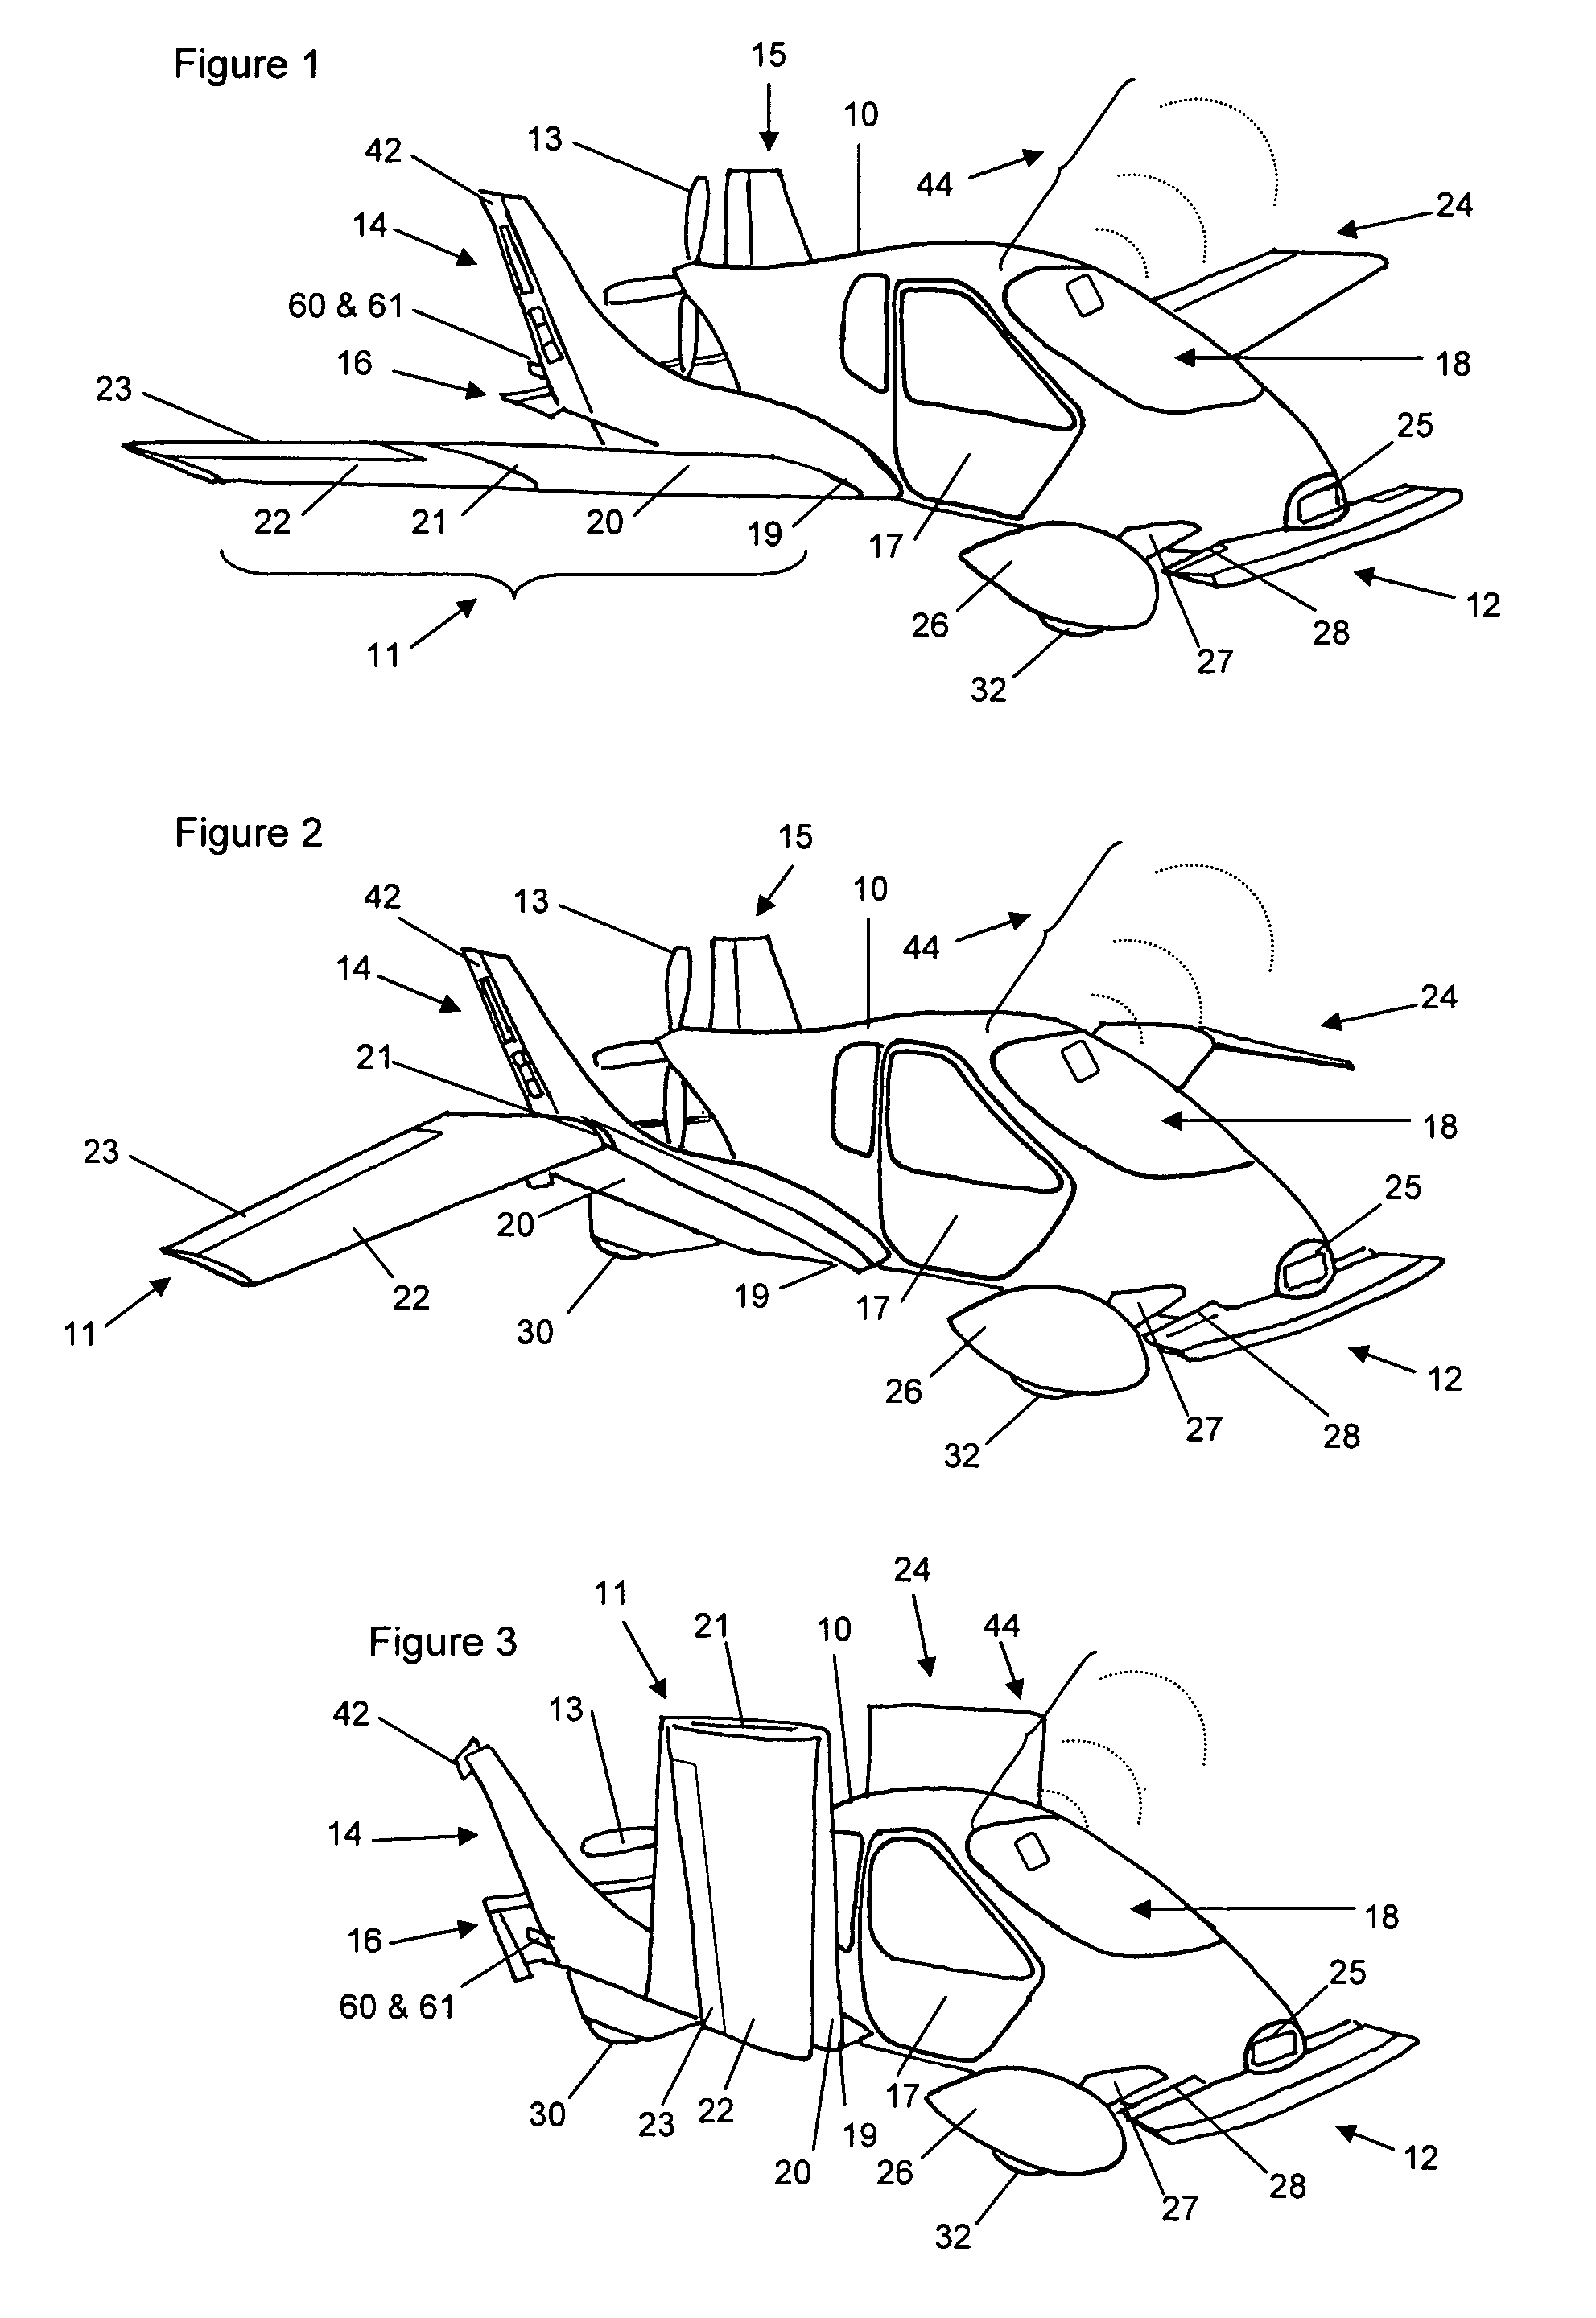 Roadable aircraft with folding wings and integrated bumpers and lighting